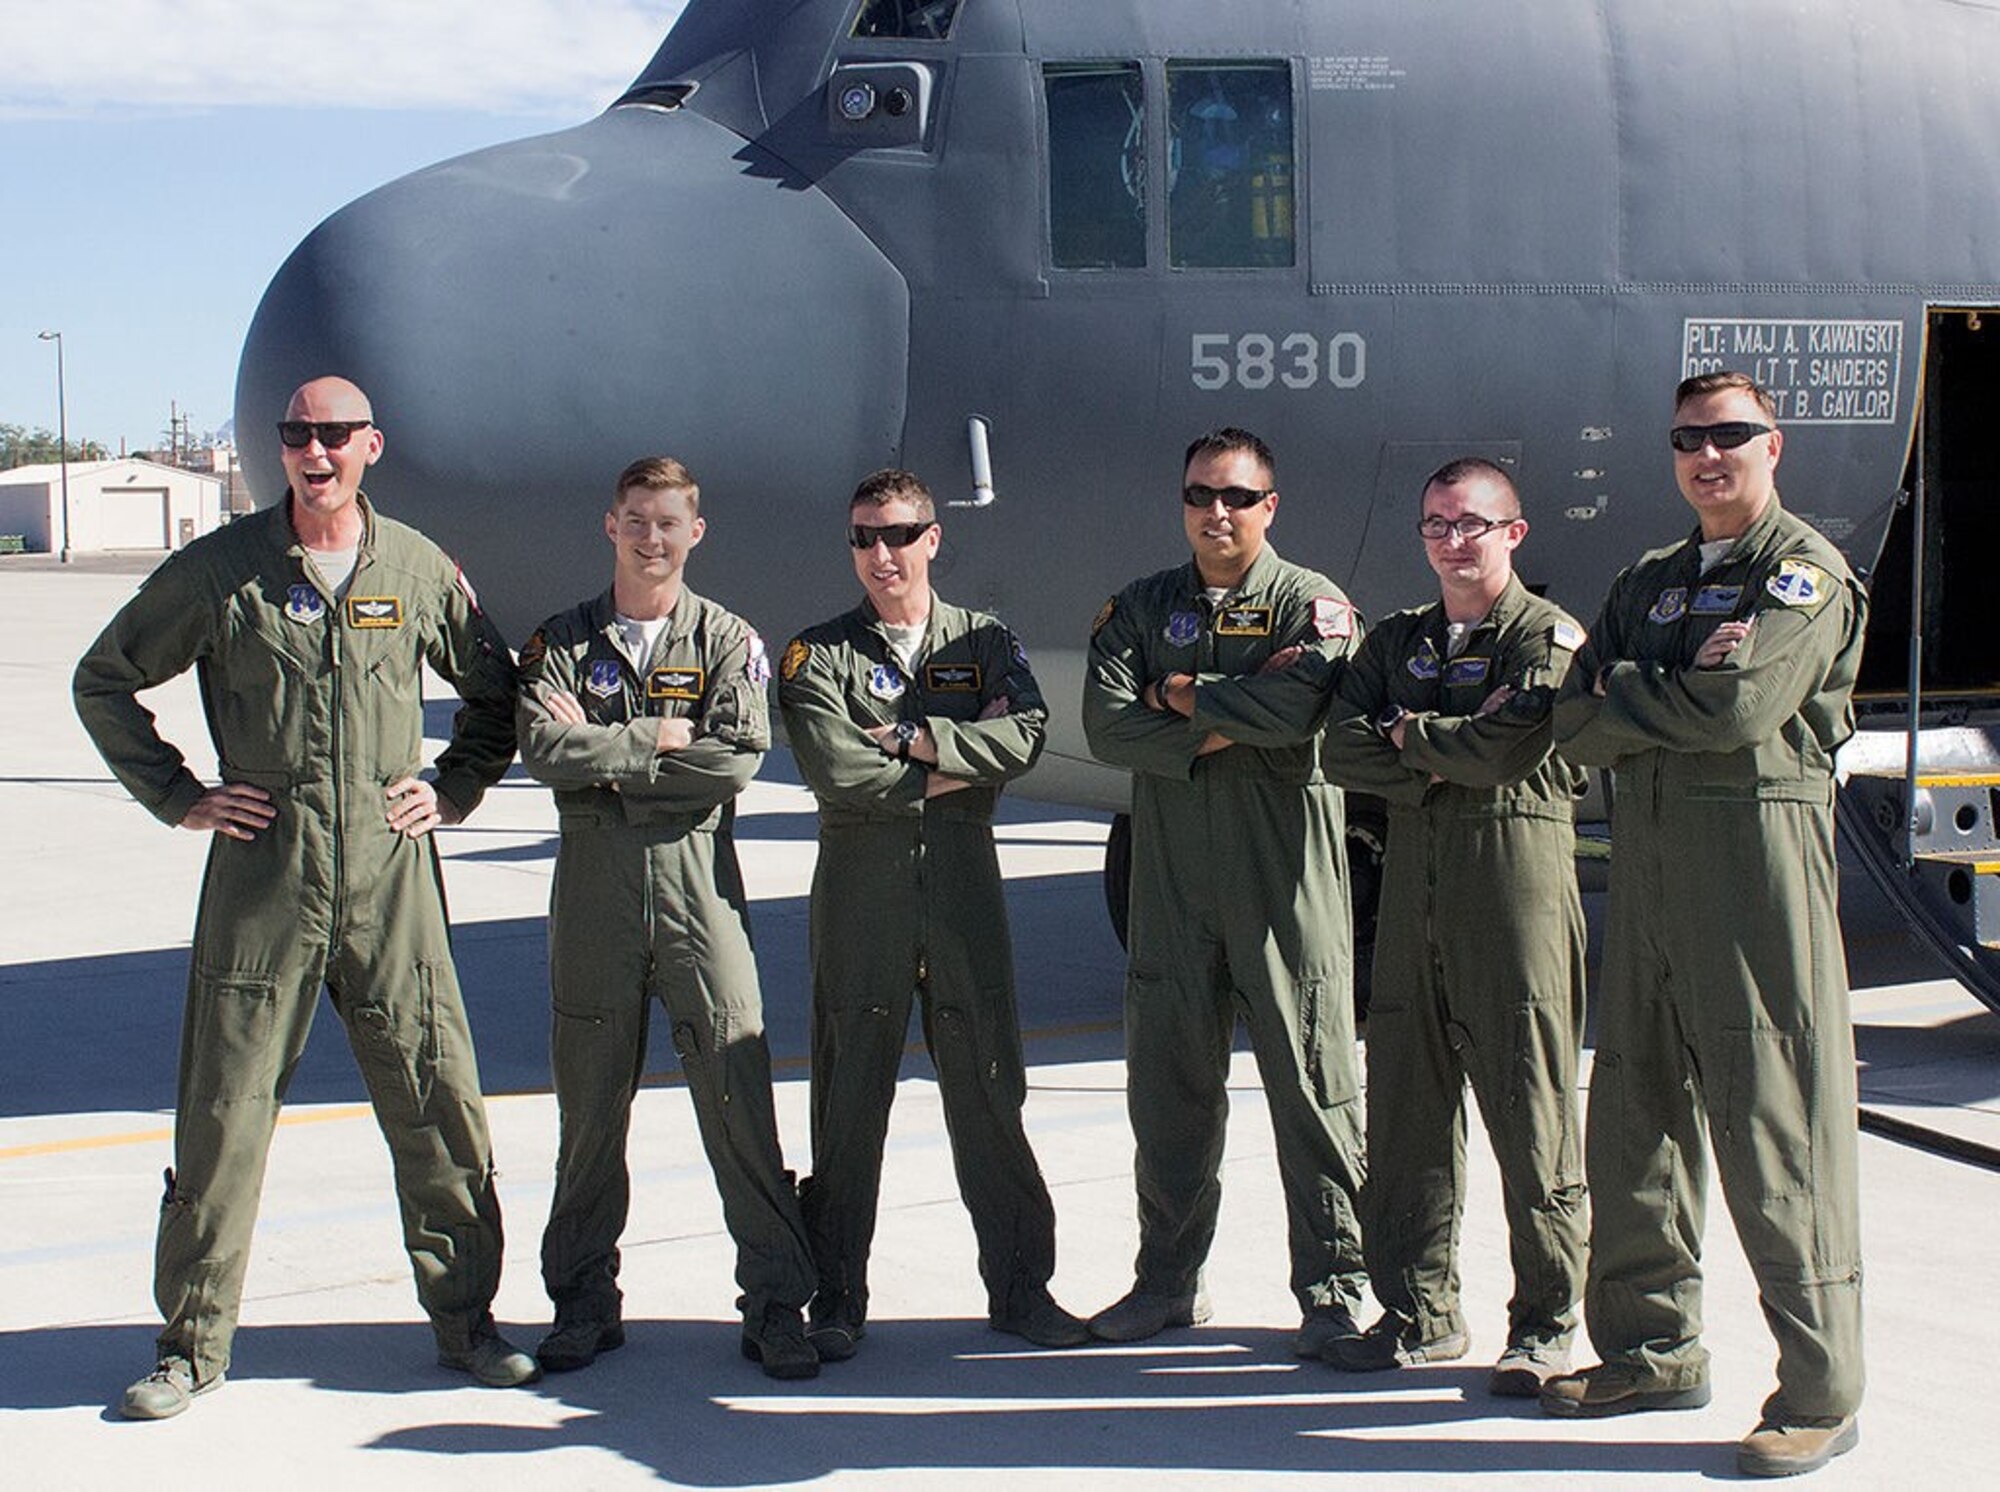 The last active-duty aircrew for the HC-130 P/N King poses for a photo at Kirtland before taking off to bring the plane to Patrick Air Reserve Base, Florida. Crew members are, from left, Maj. Christian Walley, Maj. Sean Bell, Lt. Col. Kit Flanders, Master Sgt. Bobby Martinez, Staff Sgt. Kyle McQuiston and Master Sgt. George Telesh. The King was the last in the active-duty Air Force. Only Reserve and Air National Guard units will use the planes now. (Photo by Bud Cordova)